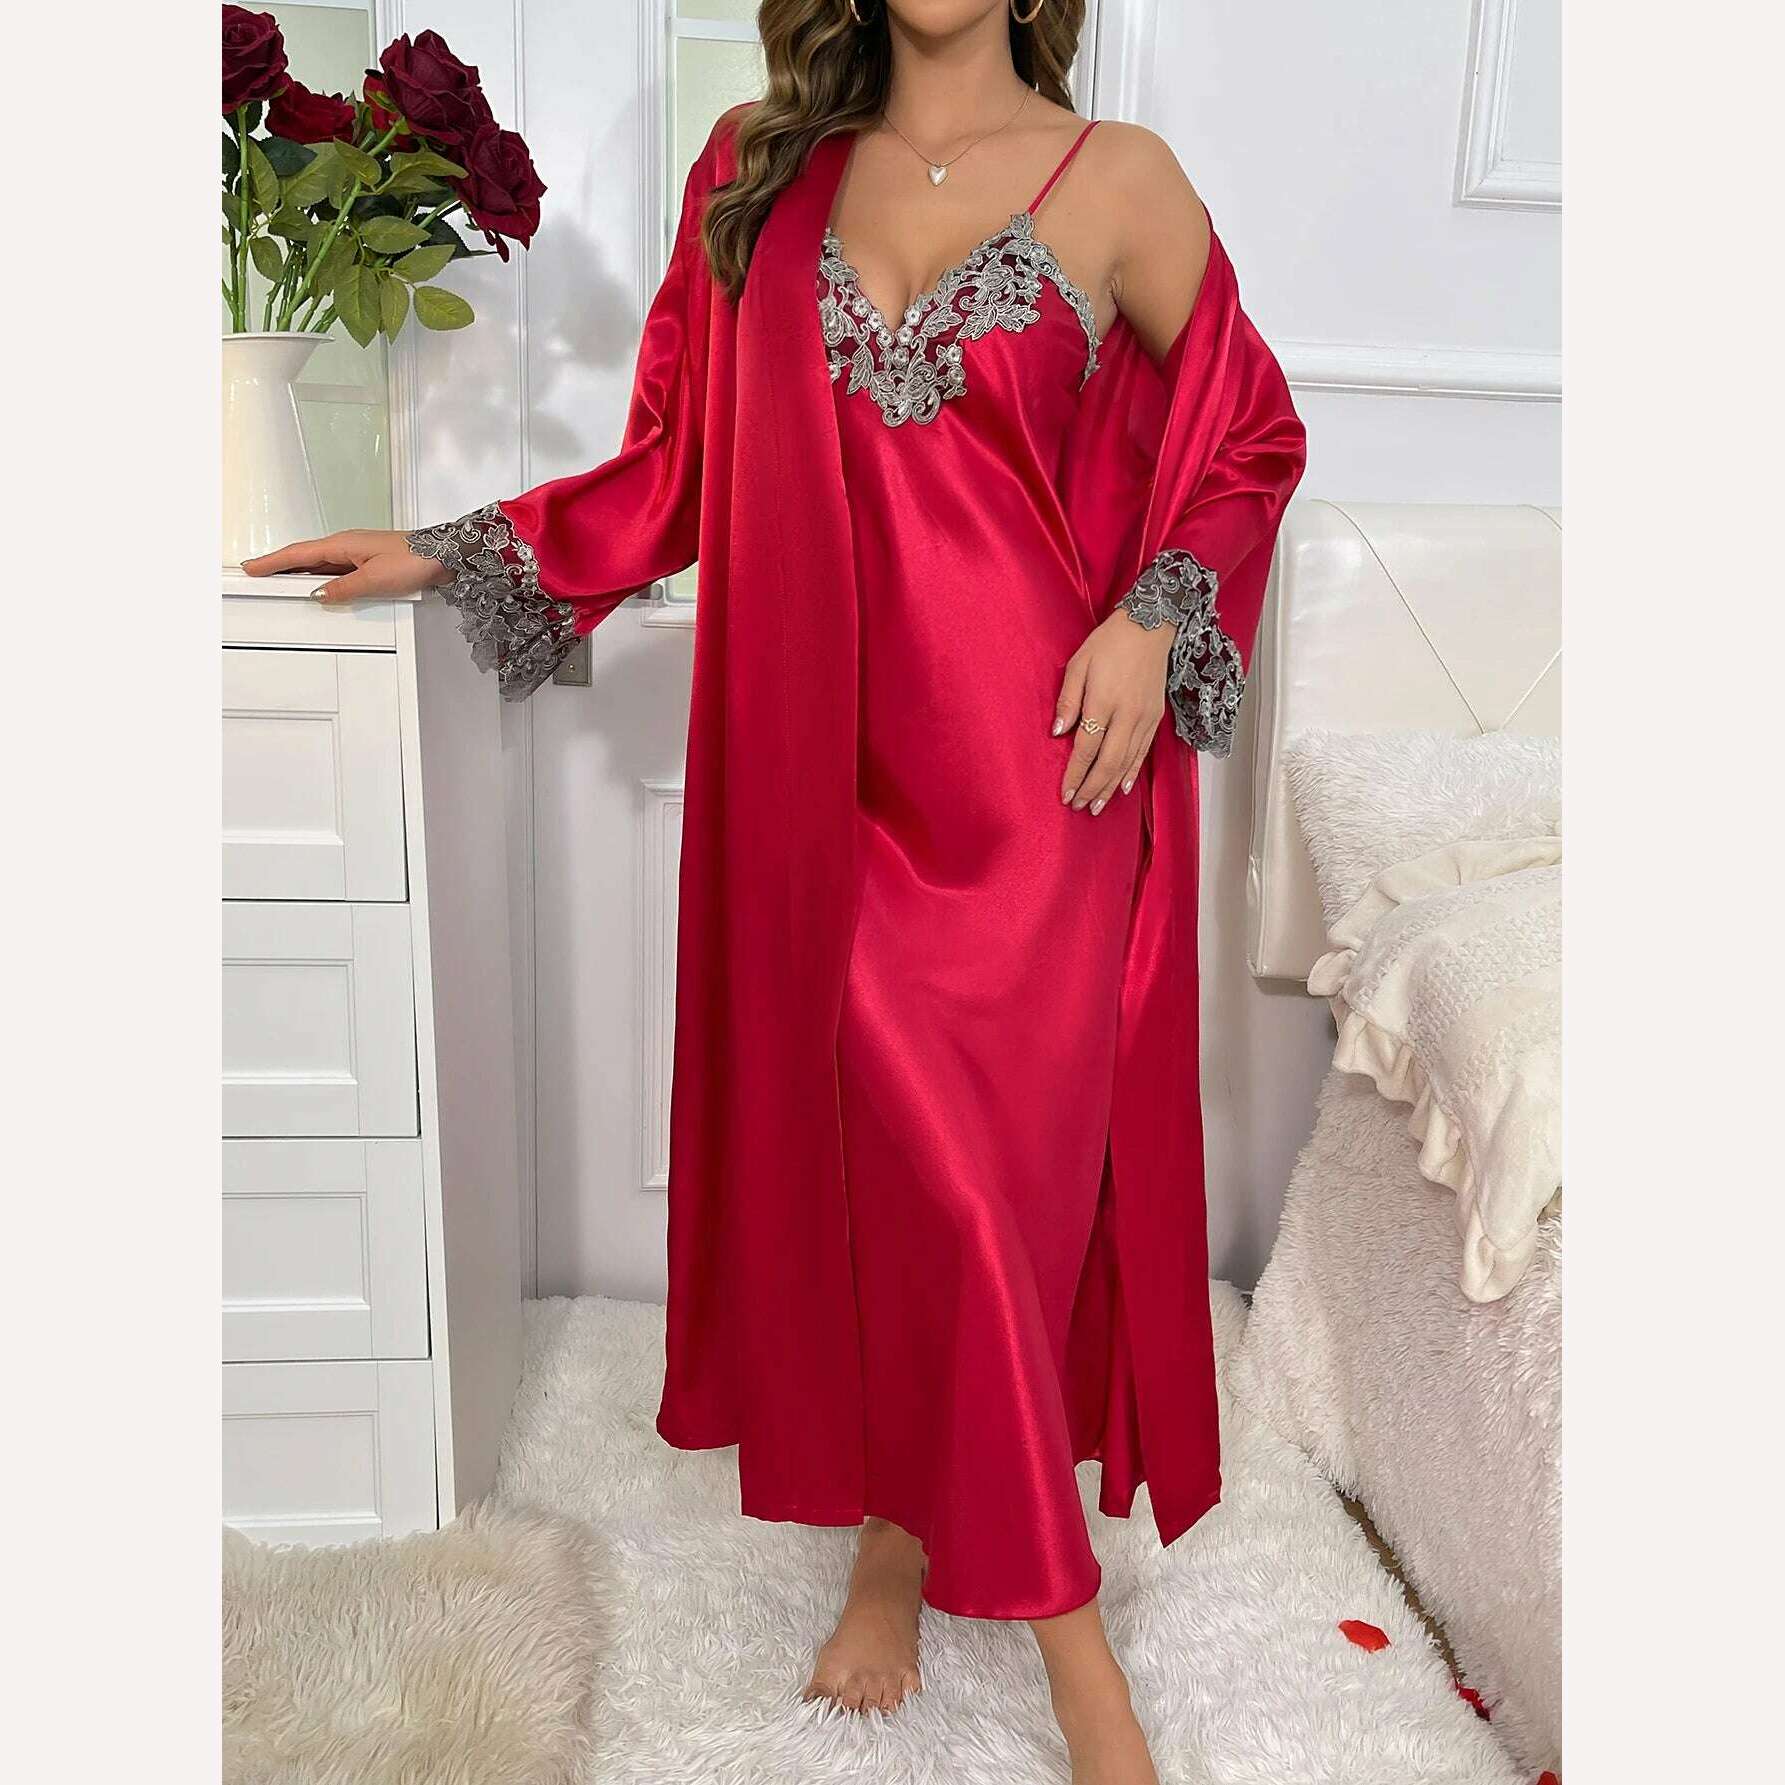 KIMLUD, 2cs Contrast Lace  Long Sleeve Belted Robe V Neck Slip Dress Sexy Elegant Women Pajamas  Sets, Red / XL, KIMLUD Womens Clothes